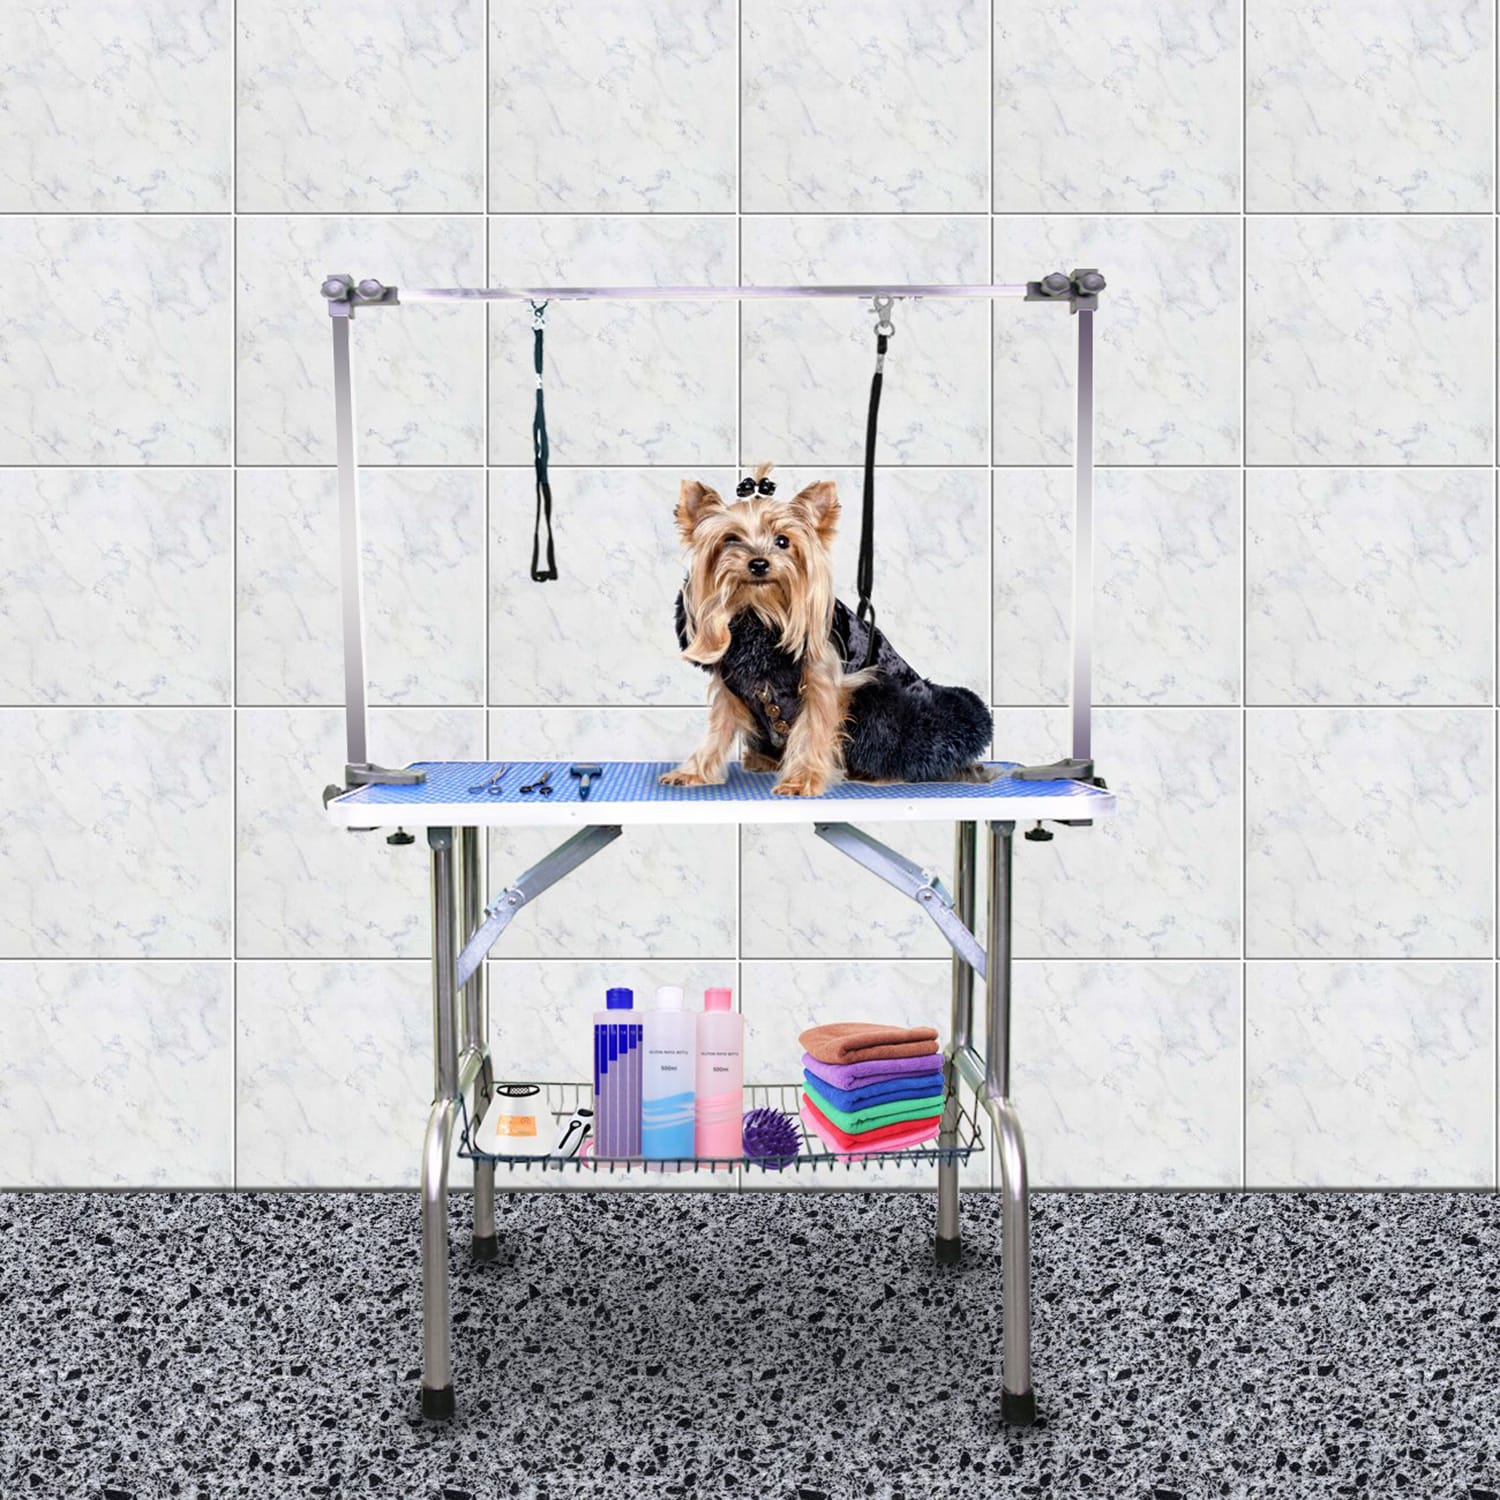 Mondawe 36-in Adjustable Pet Grooming Table for Medium Dogs/Cats - Silver, Commercial Use, Sturdy Construction Stainless Steel | MD-CHW011